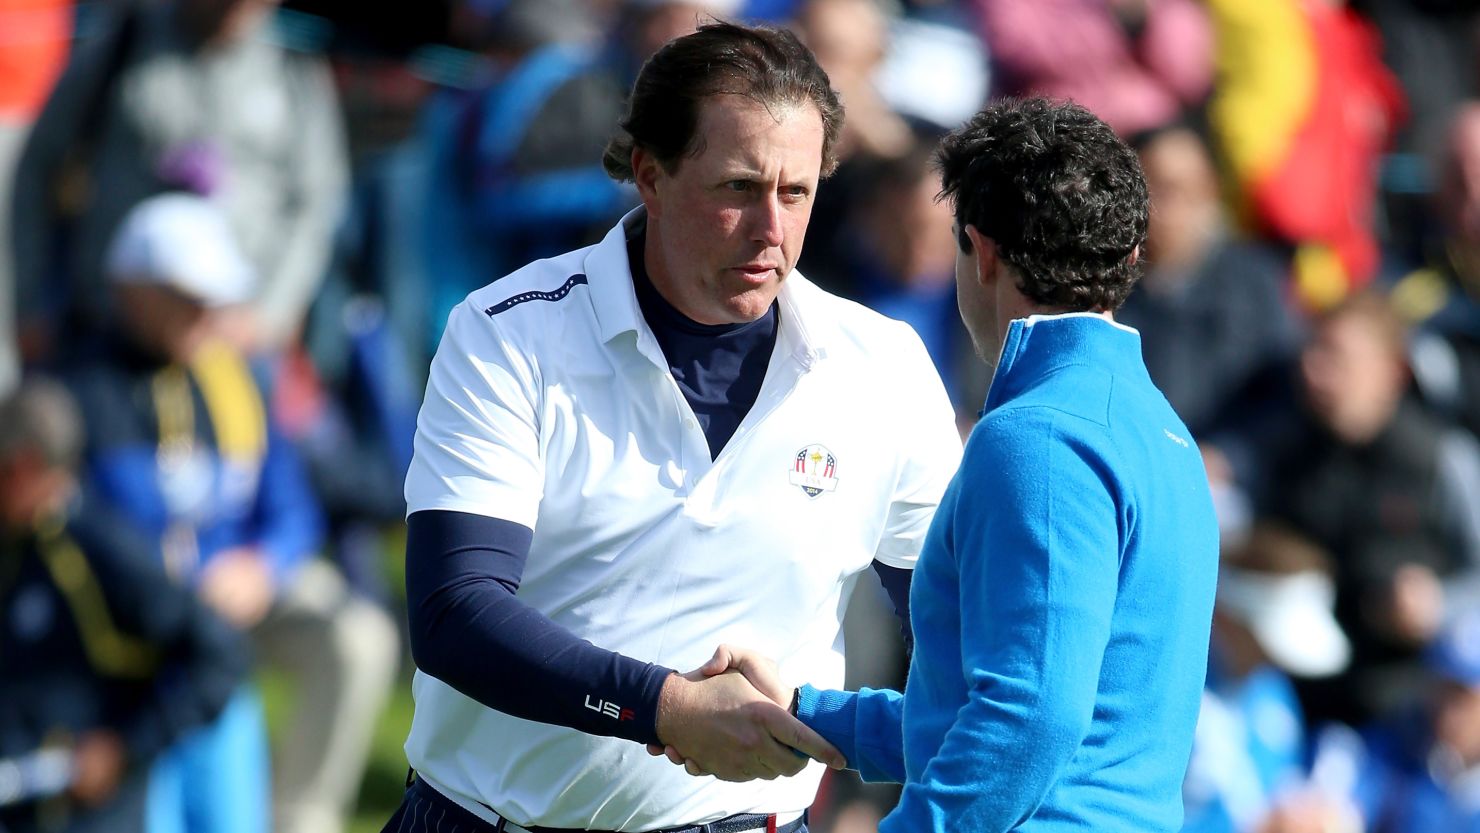 Phil Mickelson shakes Rory McIlroy's hand after claiming a vital point for Team USA in the final fourball match on Friday.